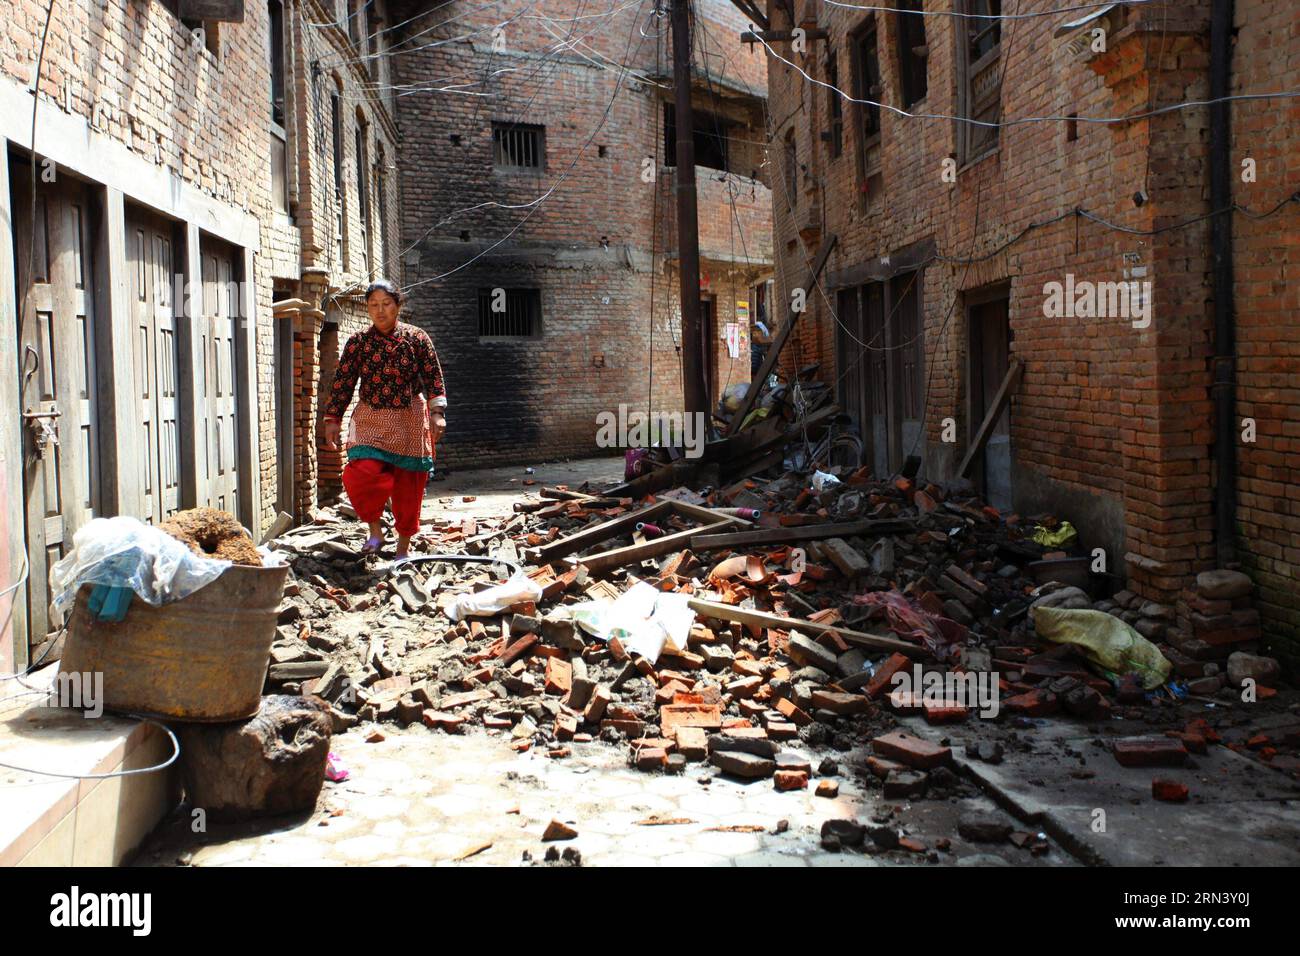 (150429) -- LALITPUR, April 29, 2015 -- A woman walks past debris after earthquake in Lalitpur, Nepal, April 29, 2015. The 7.9-magnitude quake hit Nepal at midday on Saturday. The death toll from the powerful earthquake has soared to 5,057 and a total of 10,915 others were injured. )(bxq) NEPAL-LALITPUR-EARTHQUAKE-AFTERMATH SunilxSharma PUBLICATIONxNOTxINxCHN   Lalitpur April 29 2015 a Woman Walks Past debris After Earthquake in Lalitpur Nepal April 29 2015 The 7 9 magnitude Quake Hit Nepal AT midday ON Saturday The Death toll from The Powerful Earthquake has soared to 5  and a total of 10 915 Stock Photo